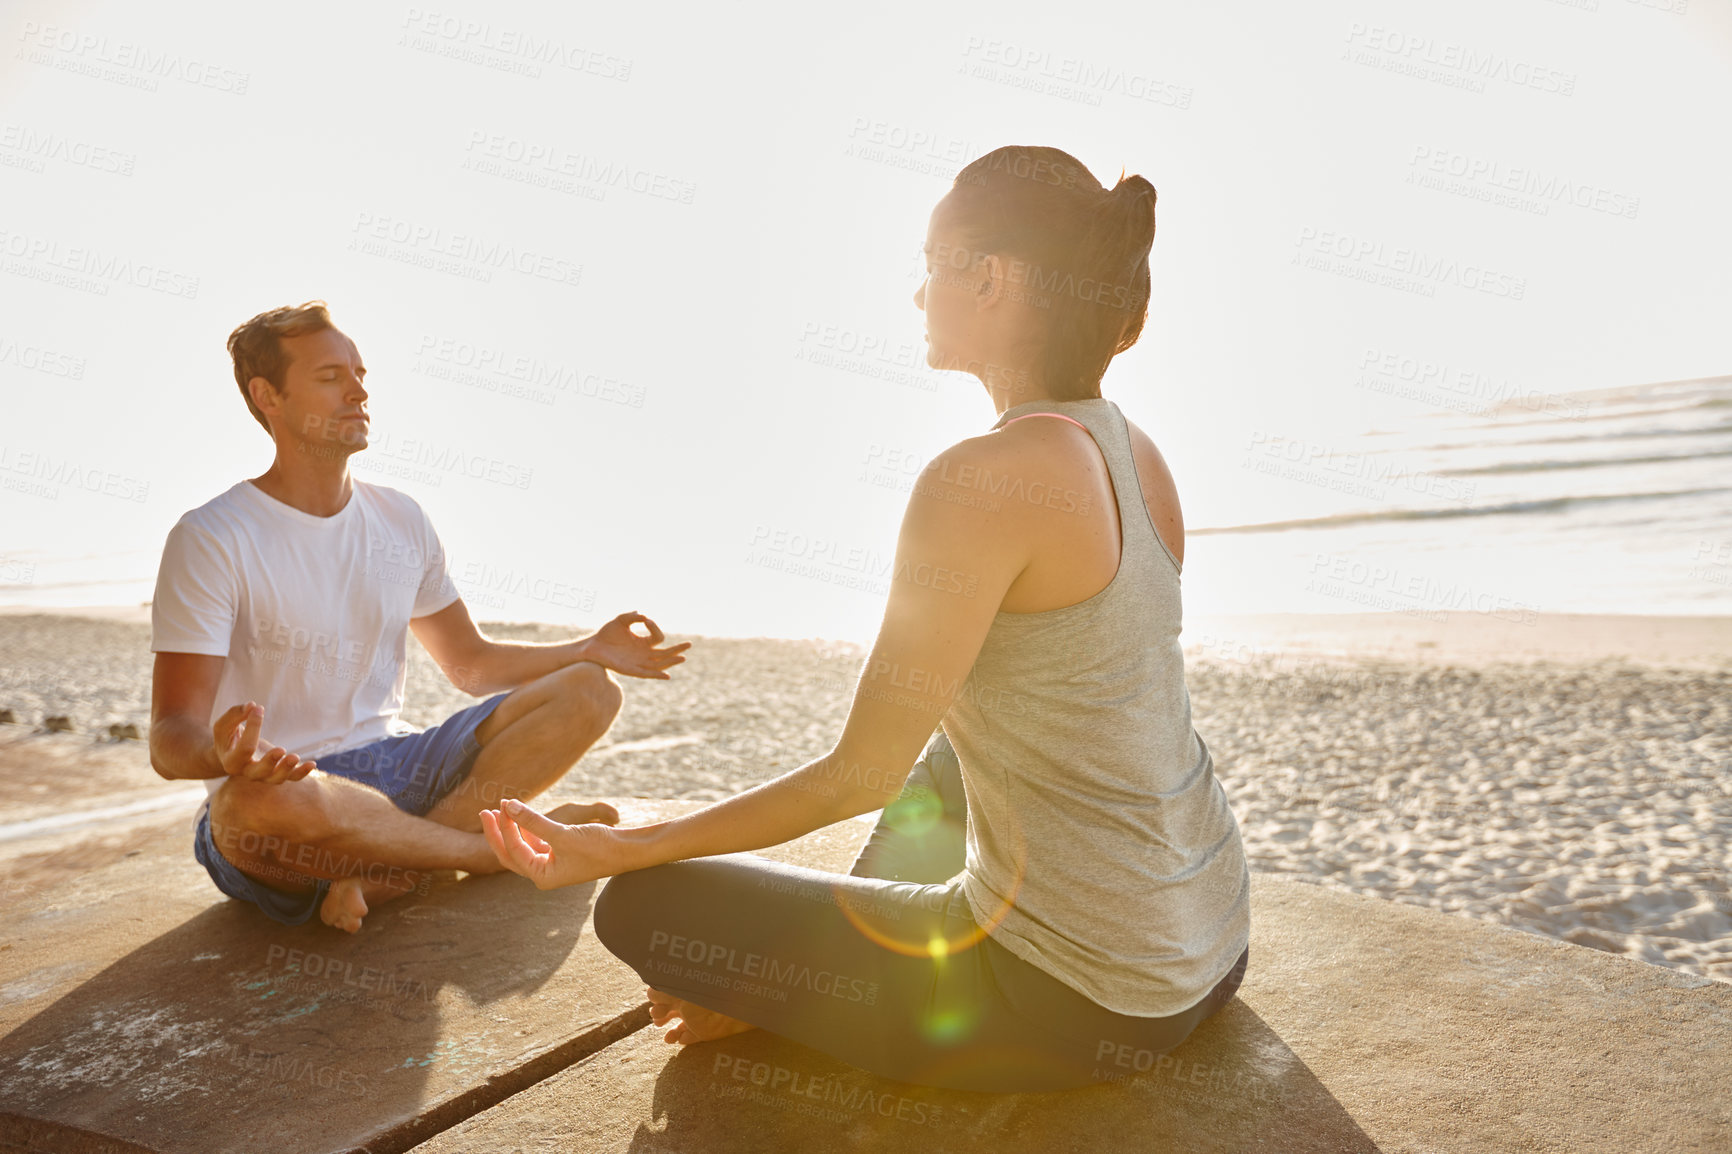 Buy stock photo Shot of a couple meditating together at the beach